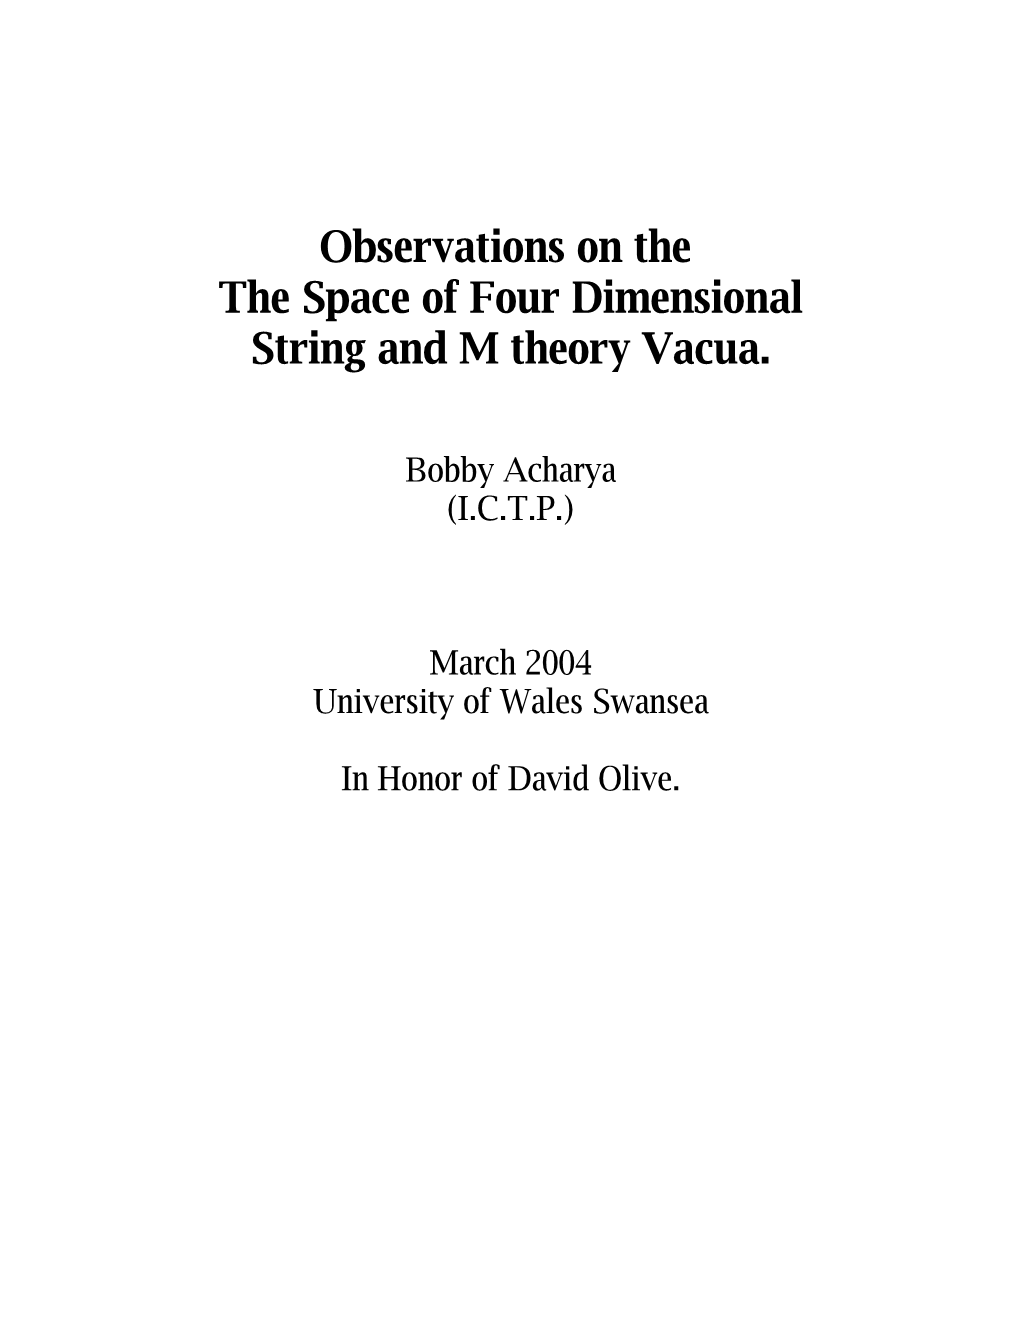 Observations on the the Space of Four Dimensional String and M Theory Vacua